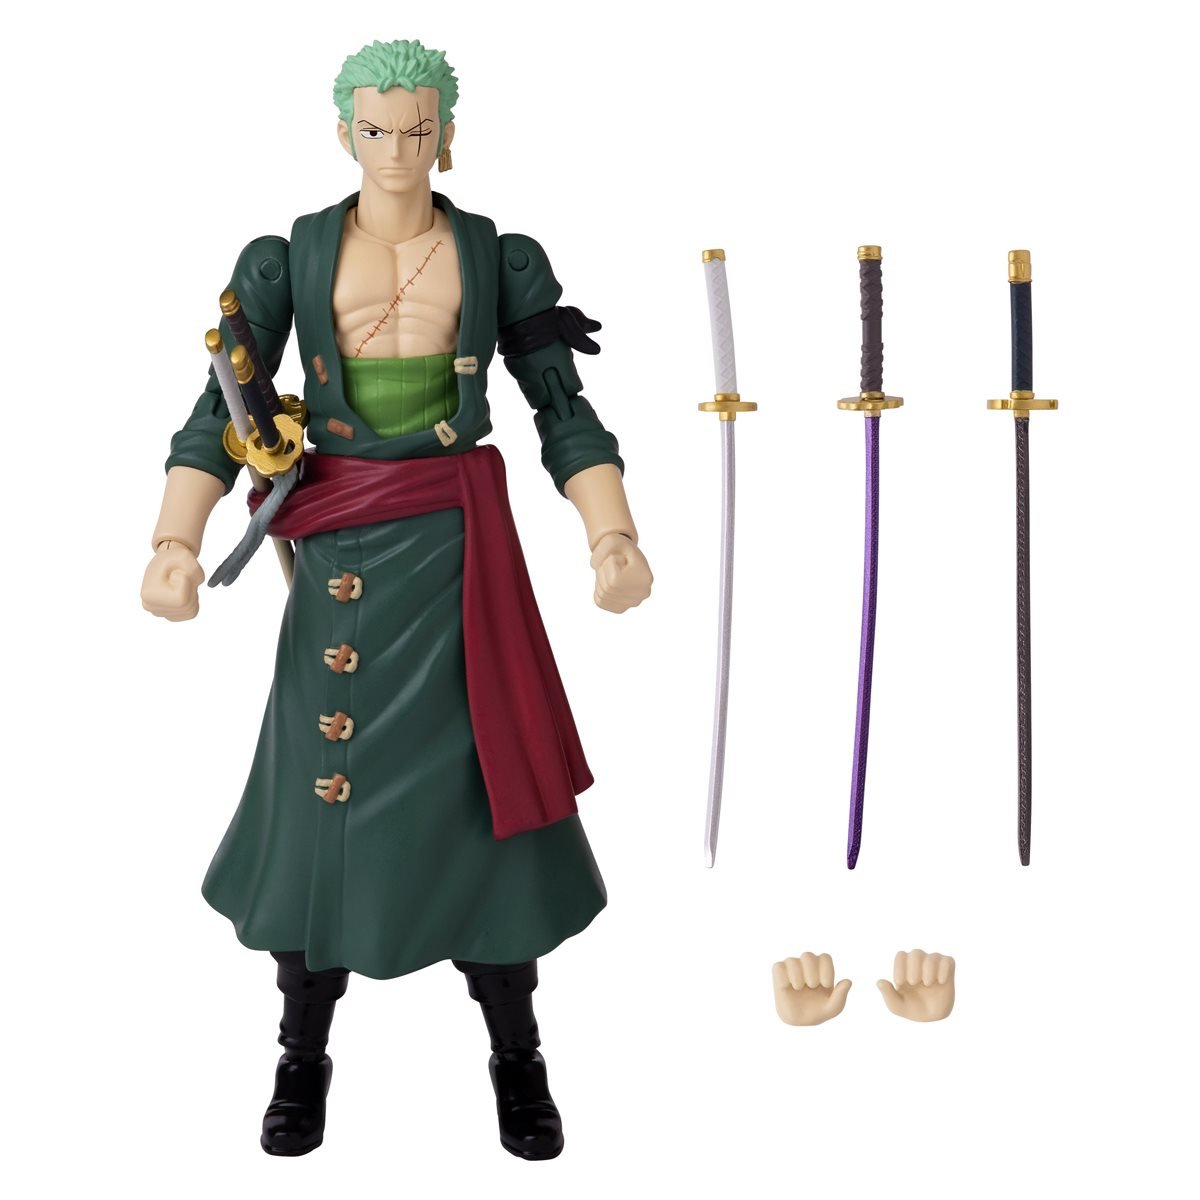 Details about New Roronoa Zoro One Piece Cool Anime PVC Action Figure Statu...